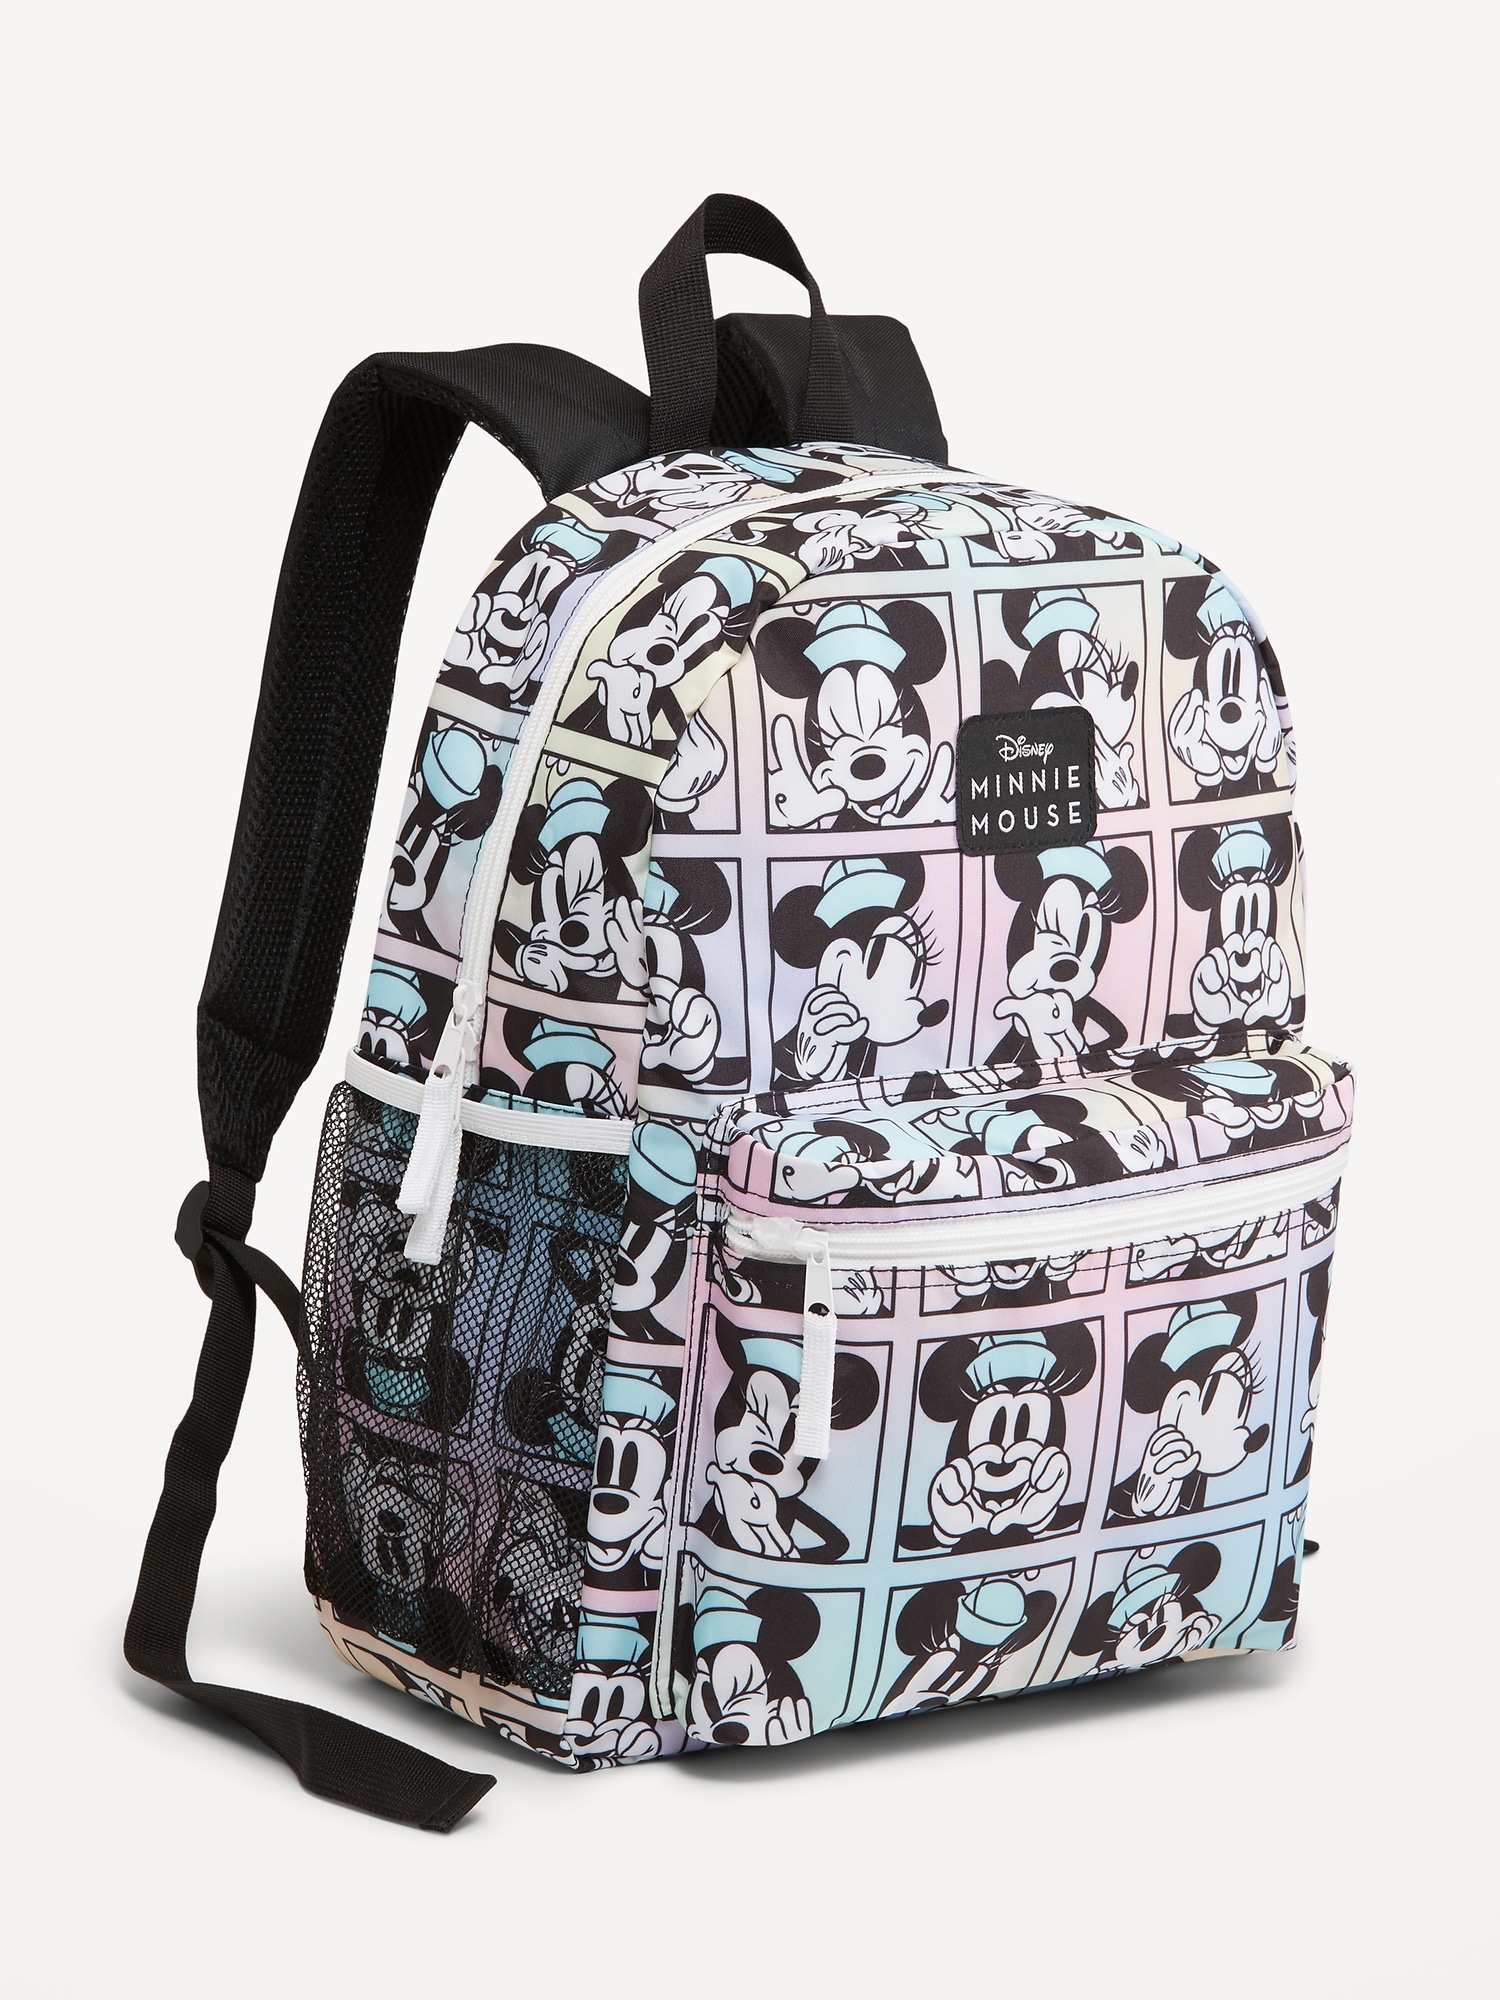 Disney© Minnie Mouse Canvas Backpack for Kids